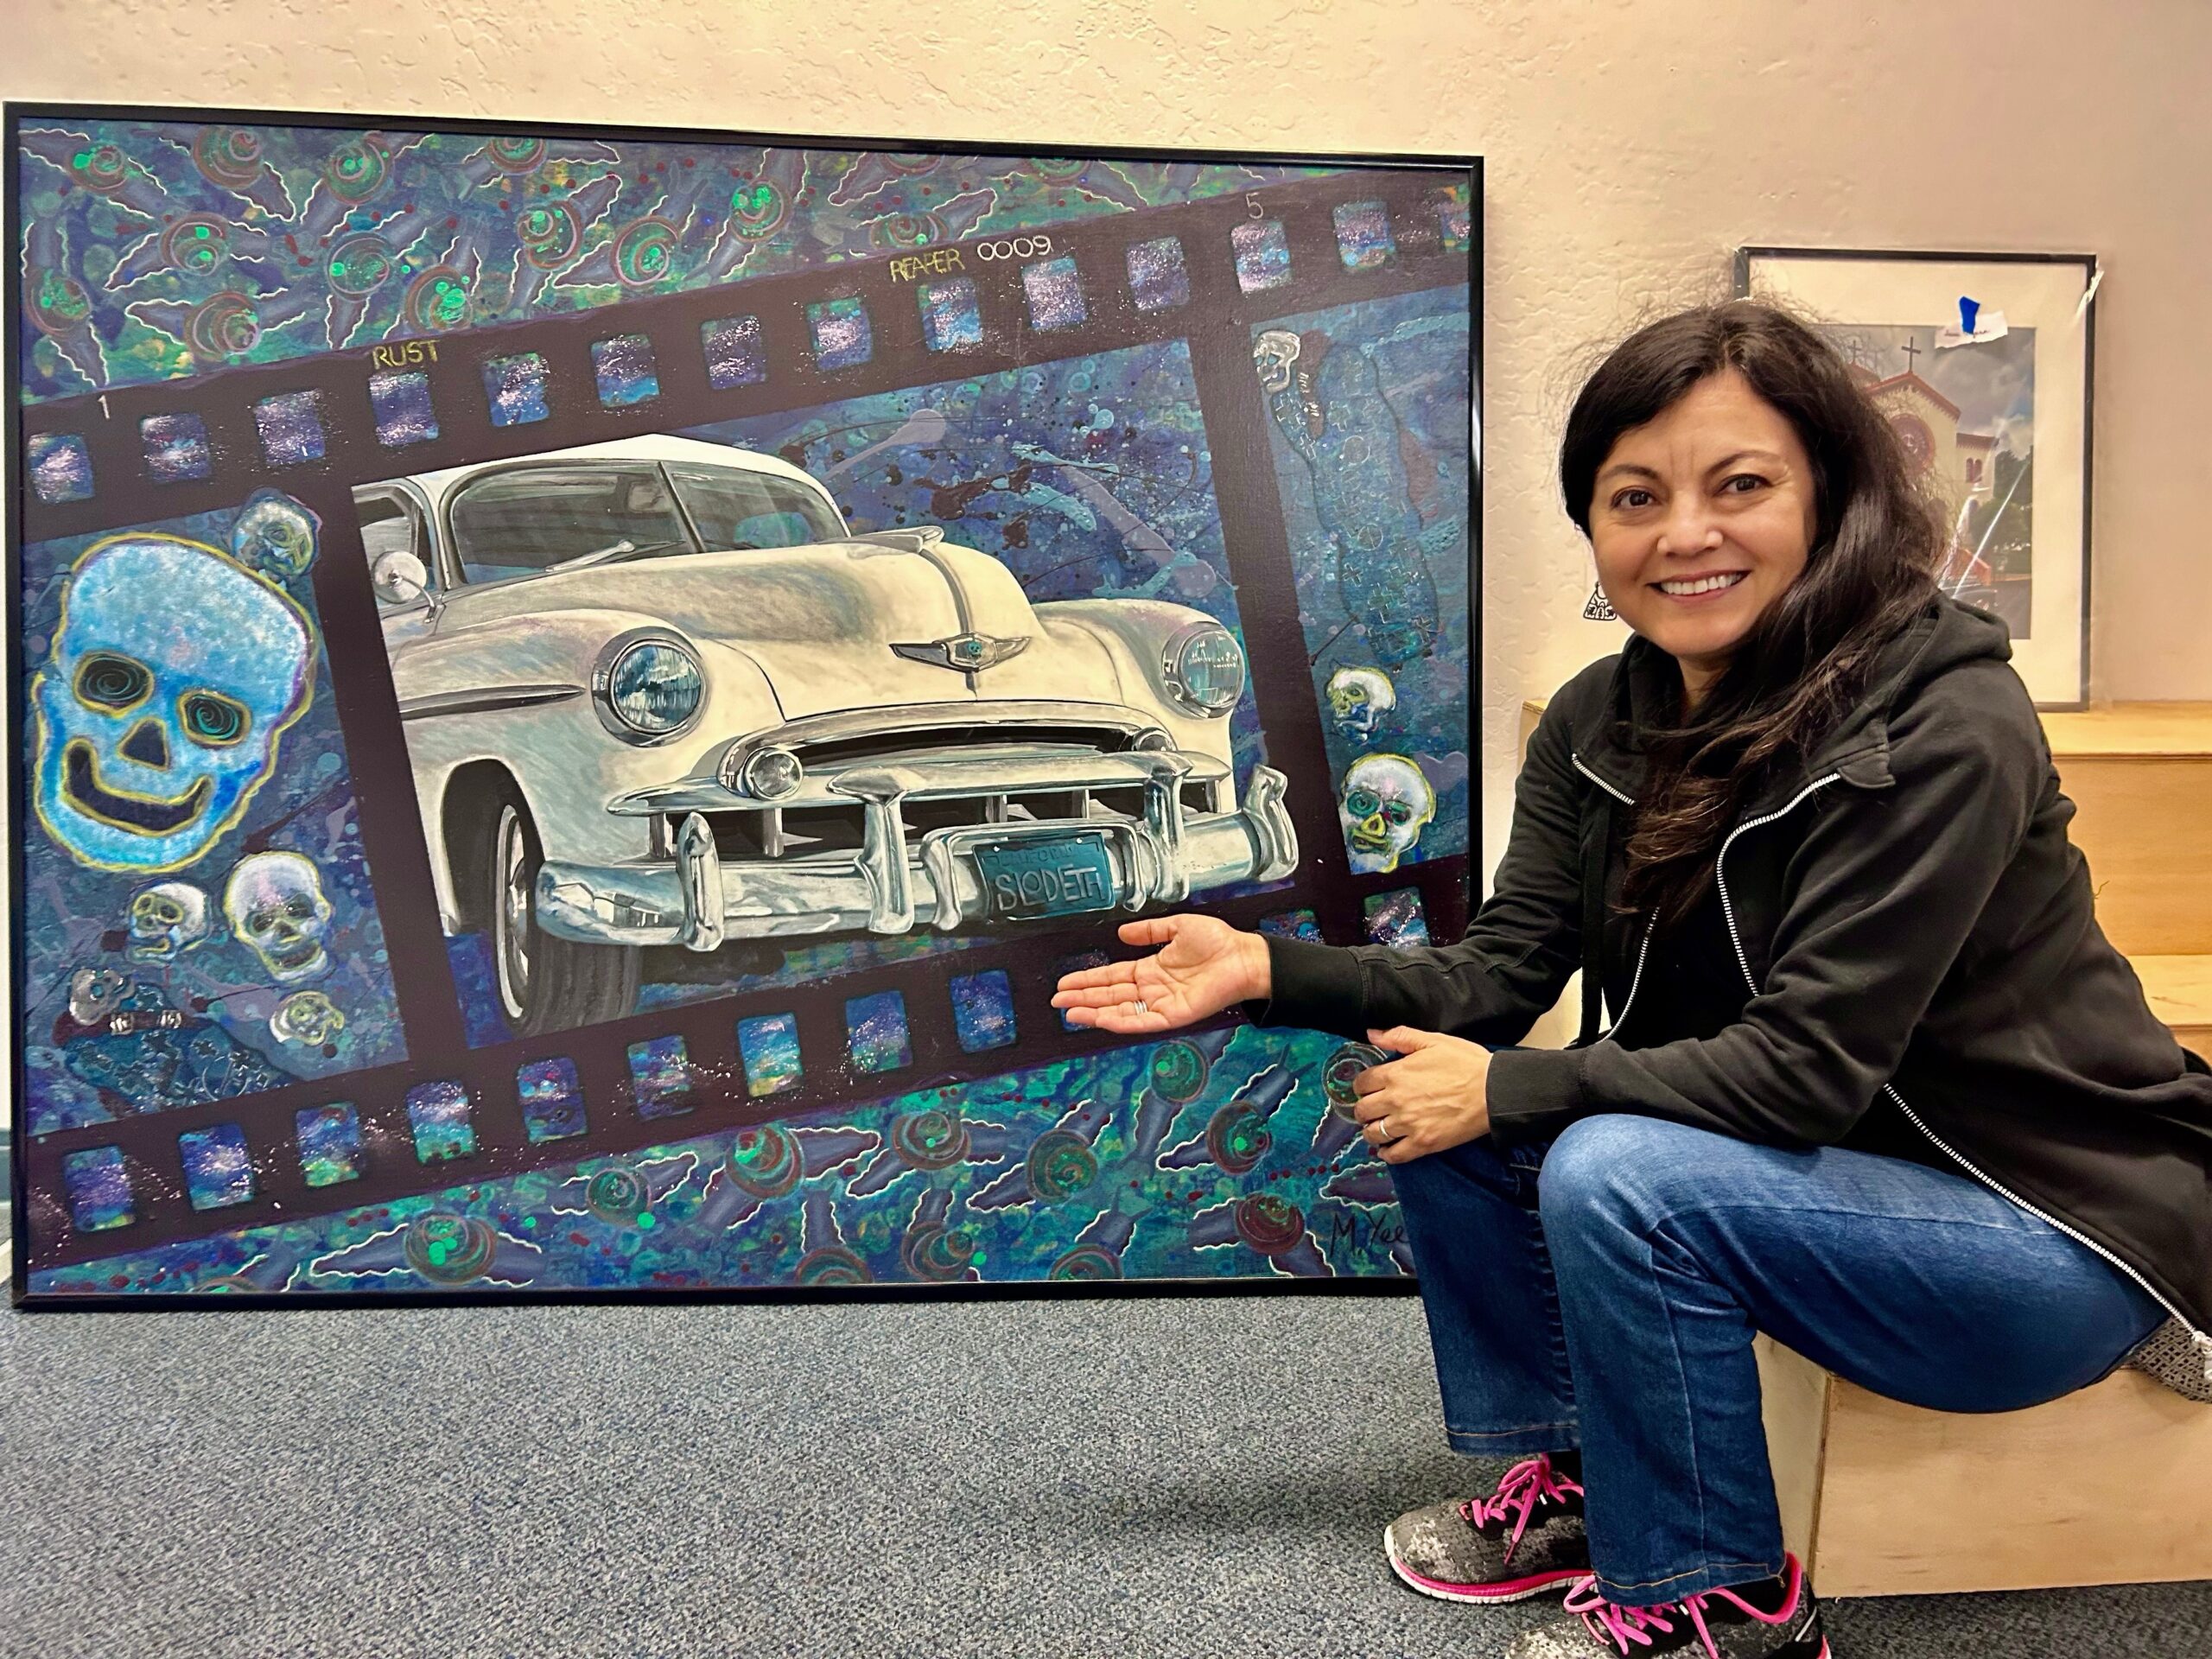 Woman wearing black jacket and jeans crouching for a photo next to piece of artwork featuring a lowrider card.